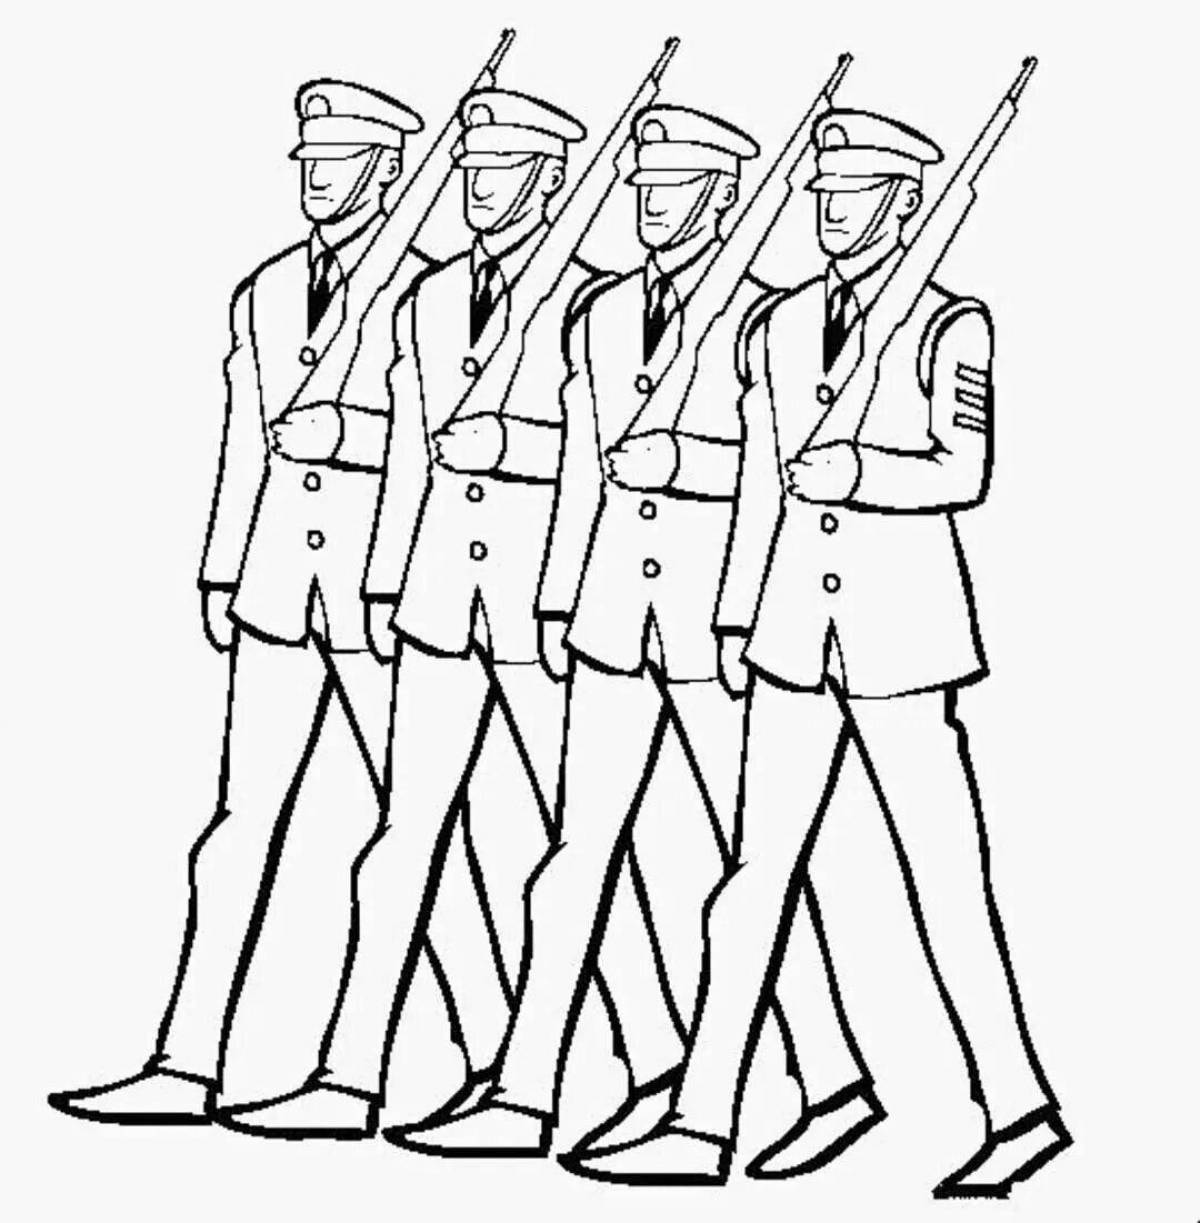 Shining soldier coloring pages for kids